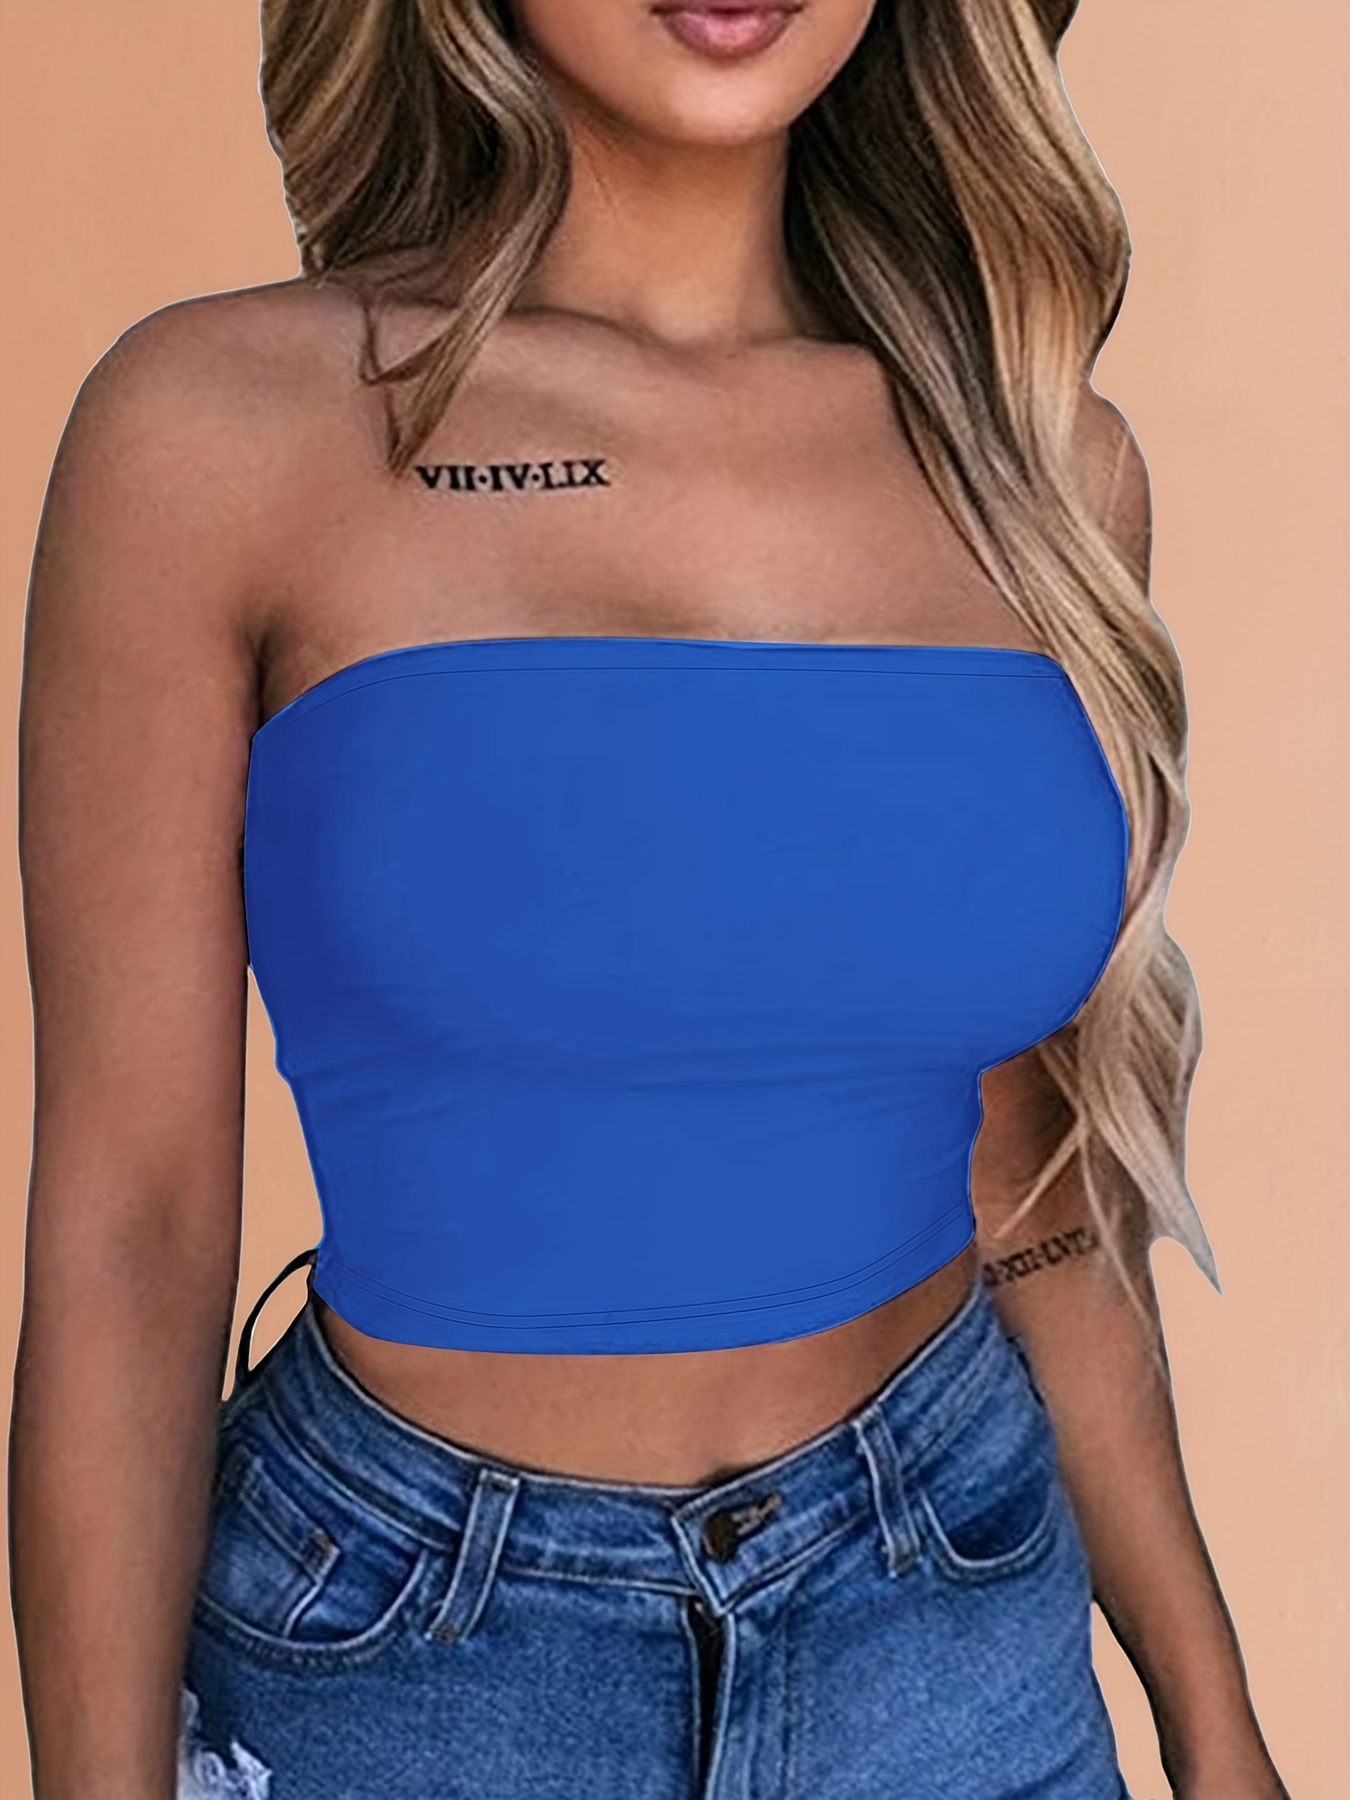 Sleeveless Strapless Shirt Breathable Tube Top Casual Fashionable